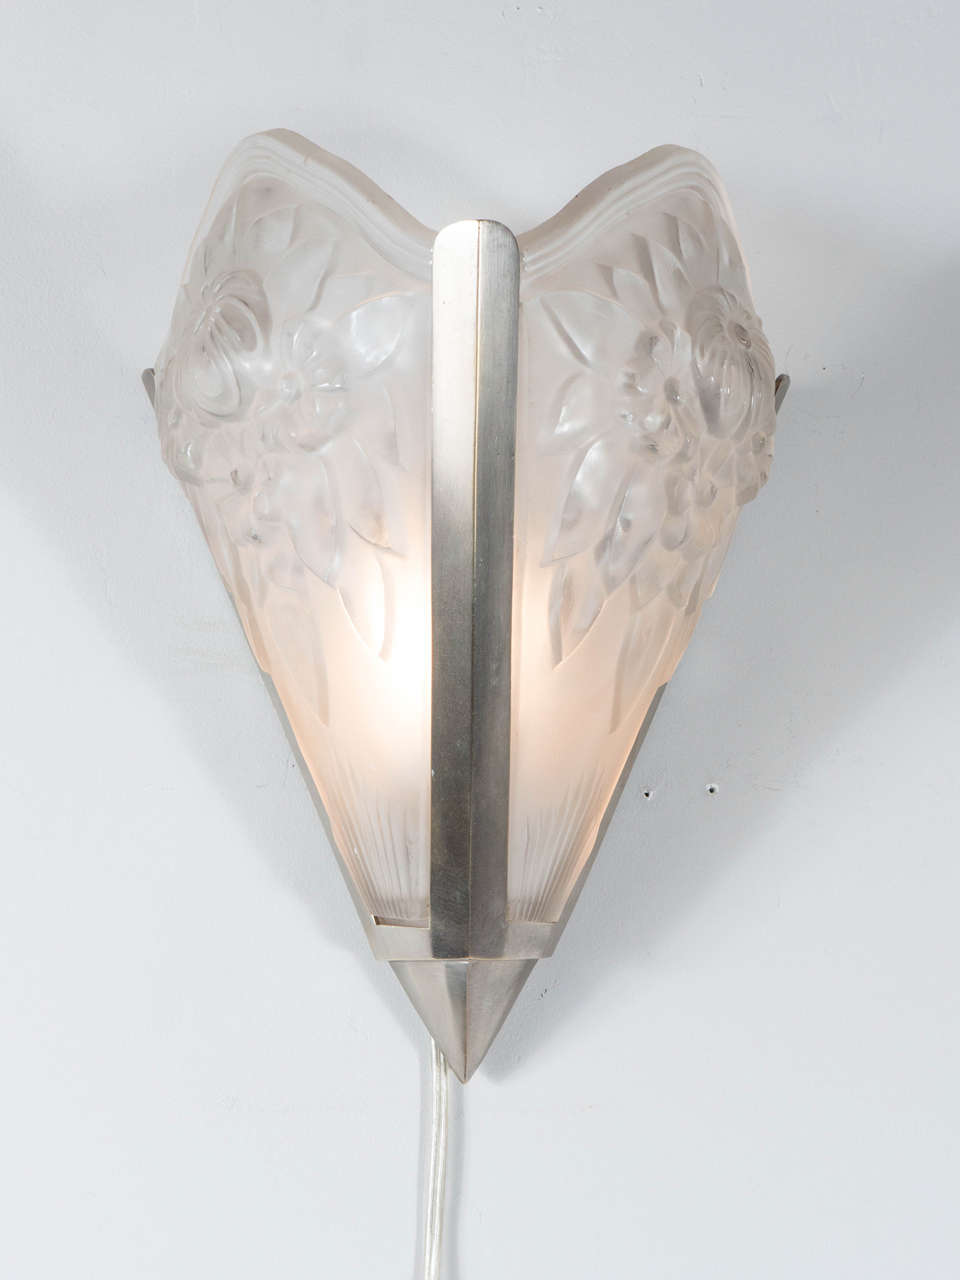 This sophisticated Art Deco sconce is in the manner of Degue. It features two panels of relief frosted glass with a bouquet  of floral detailing mounted in a brushed nickel frame. It has been newly rewired.